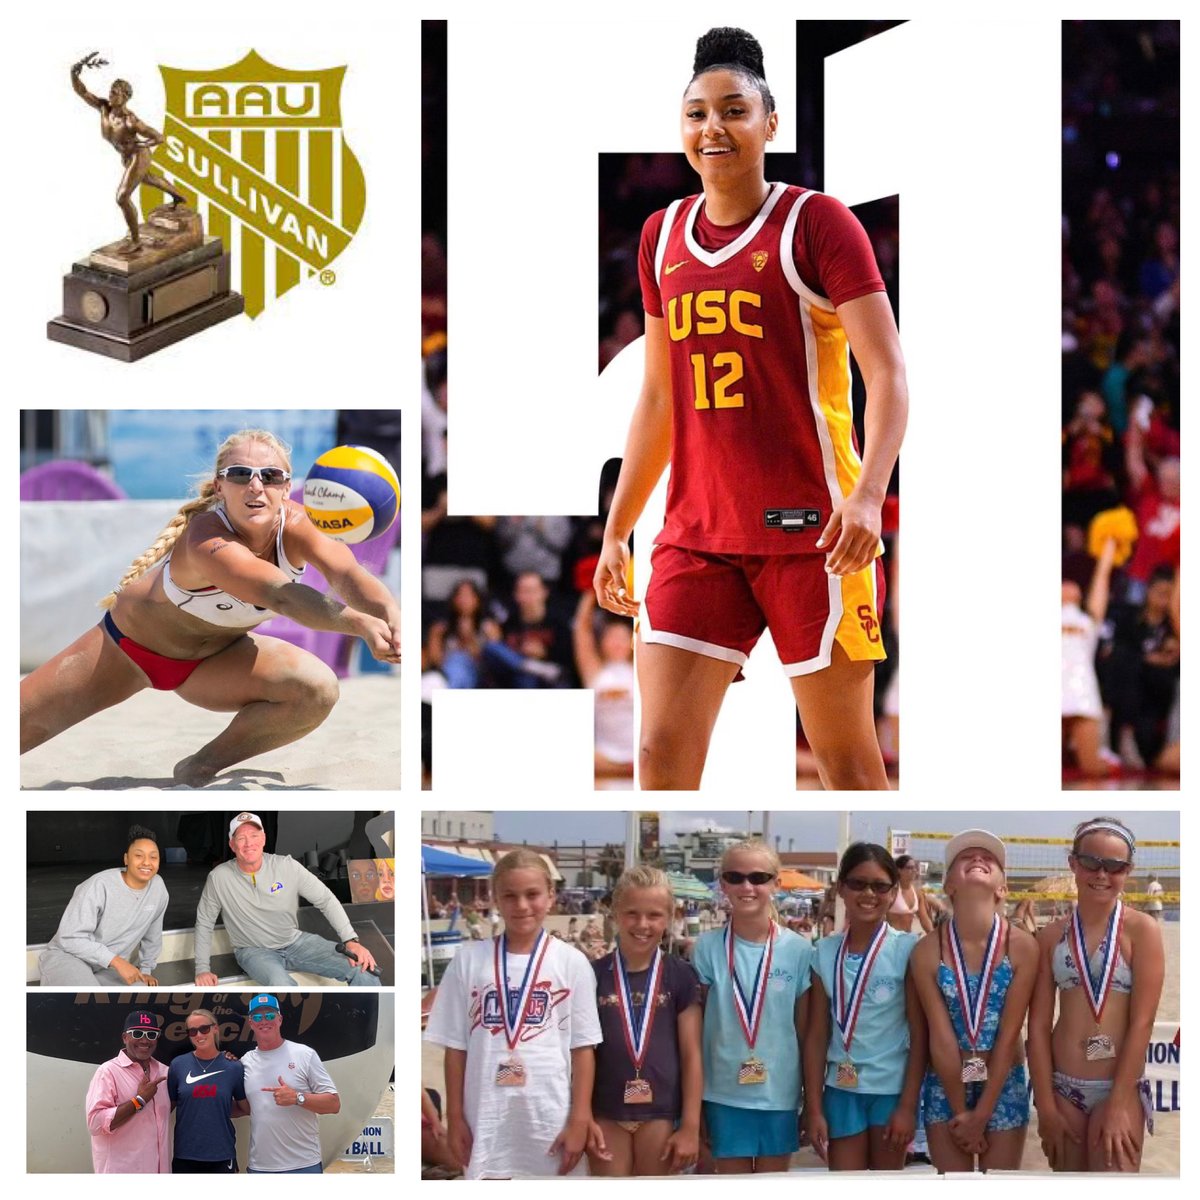 #SSDLNews - Semifinalist voting is now open for the 94th #AAUSullivanAward. #SportsStories favorites #JujuWatkins and #SaraHughes are among the nominees. VOTE NOW at bit.ly/94thsullivanse… - One vote per day, voting concludes on Wednesday, February 21st.